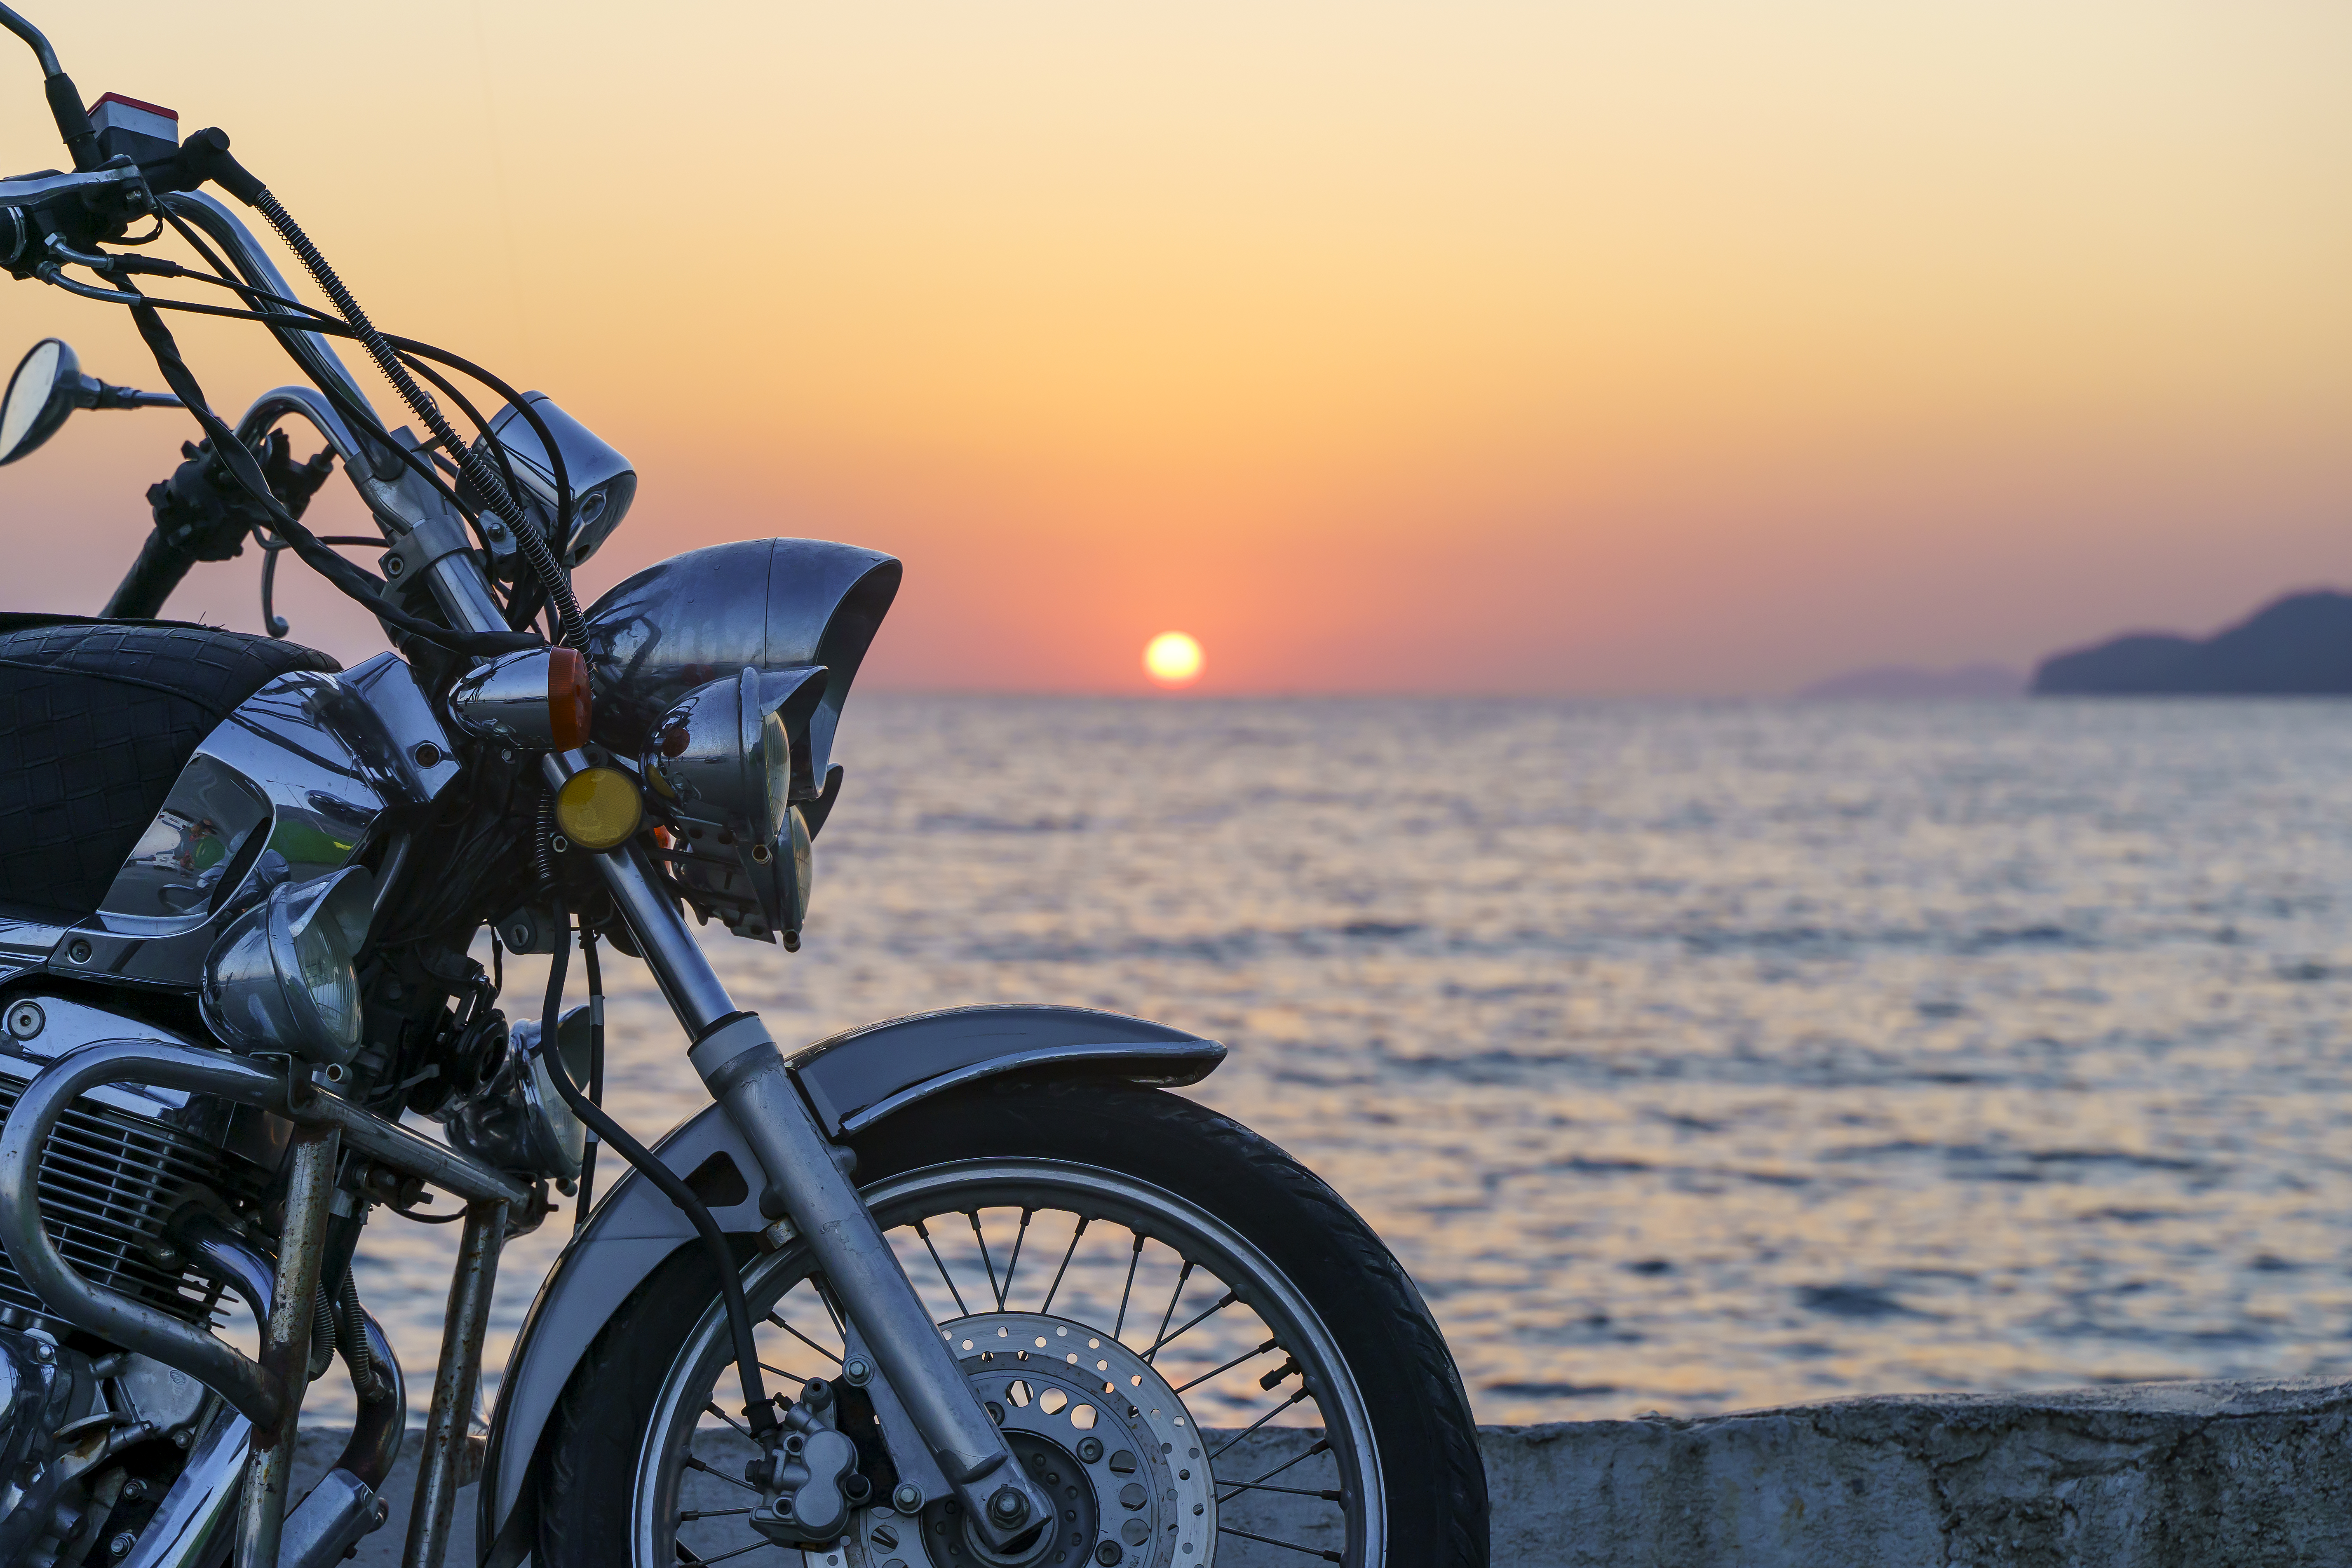 Front half of motorcycle parked in front of a body of water at dusk.